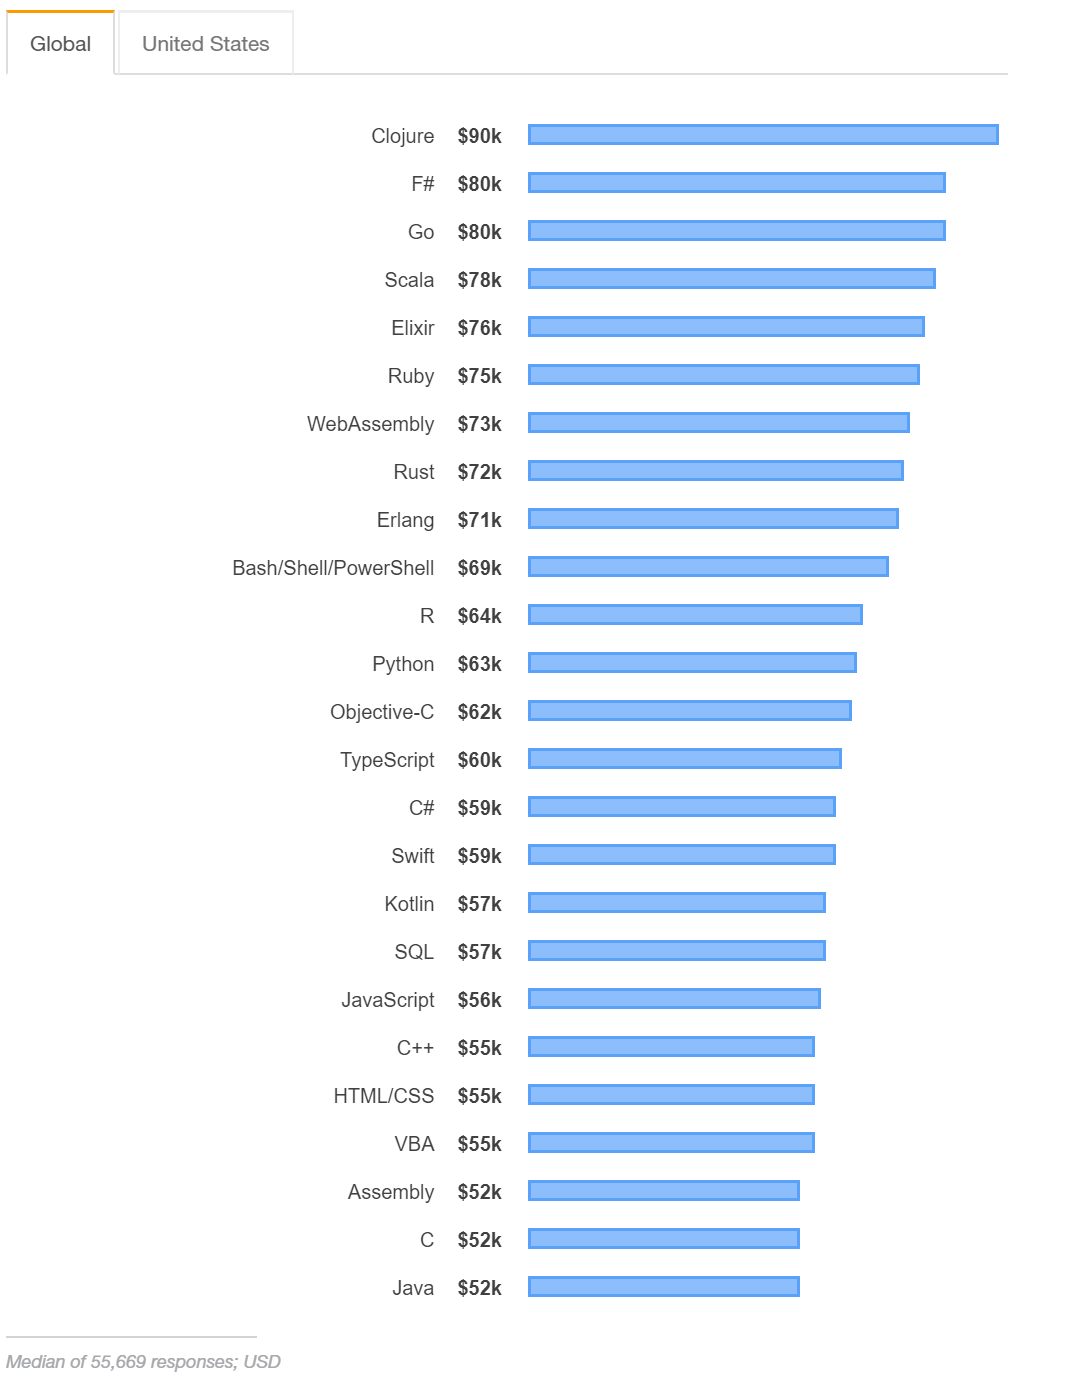 Global Pay By Technologies - JavaScript is on top of Java